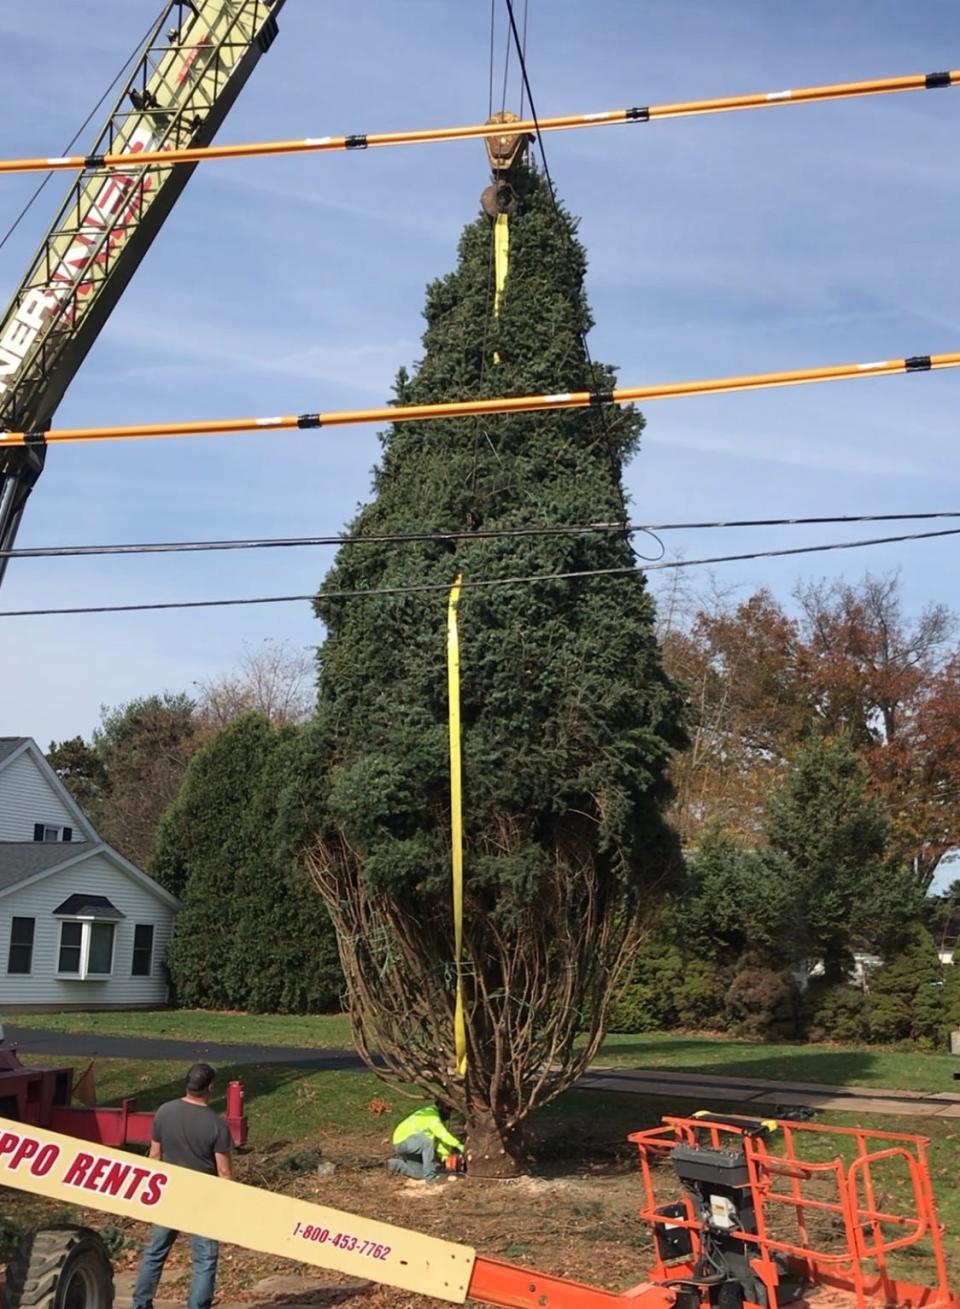 Zuk Tree Moving crews prepare to lift a 45-foot tree out of the ground in Wooster to be delivered to Cincinnati.